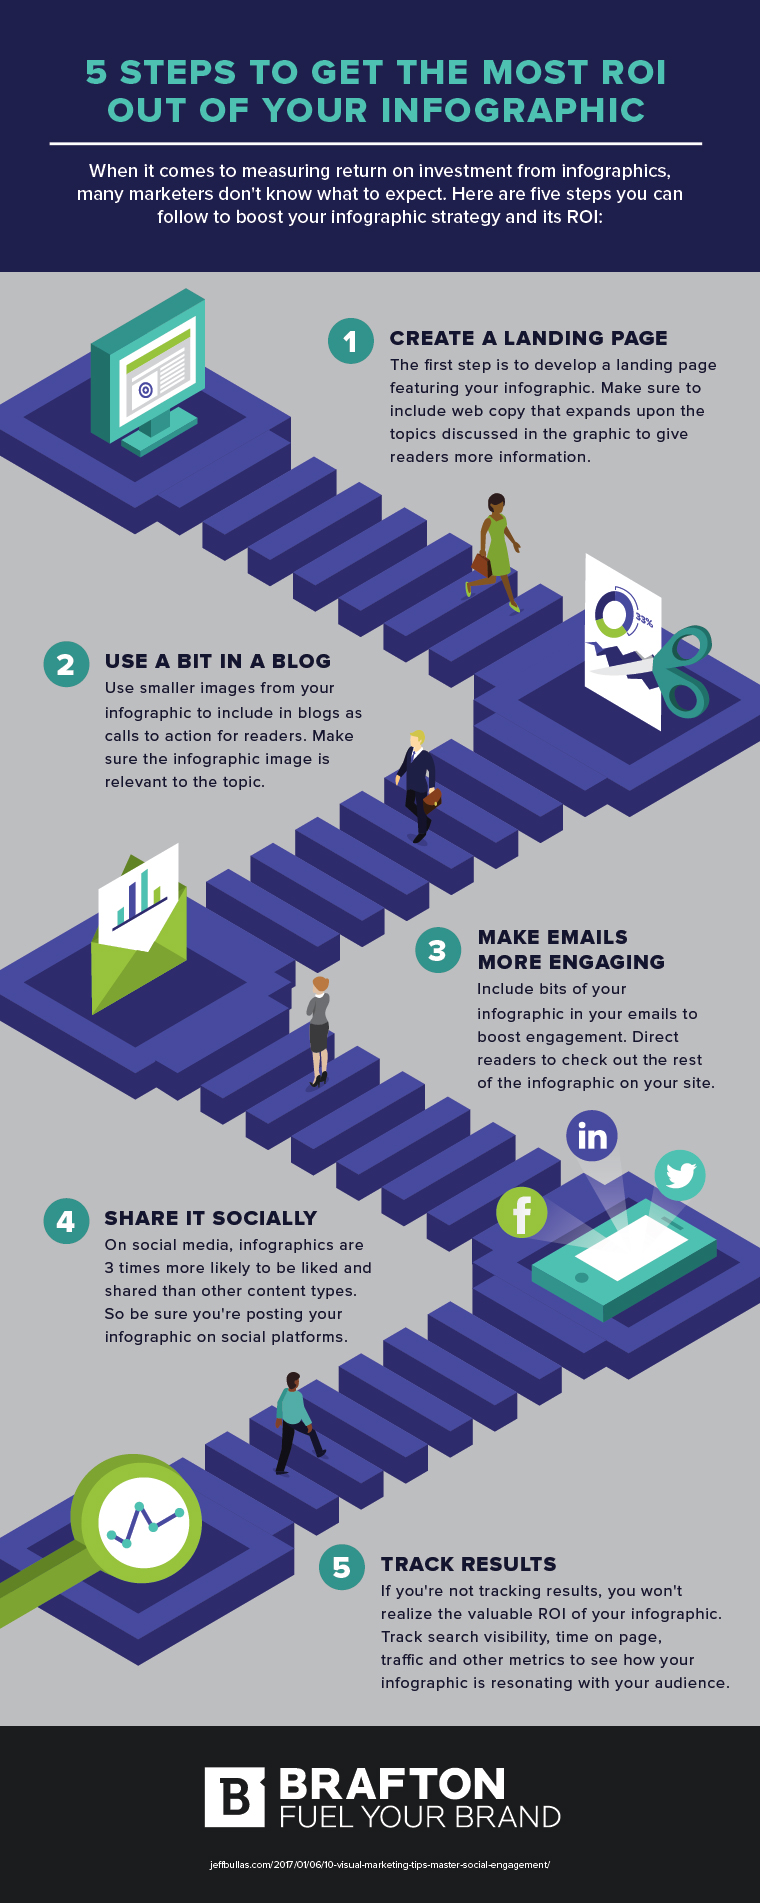 5 steps to get the most ROI out of your infographic